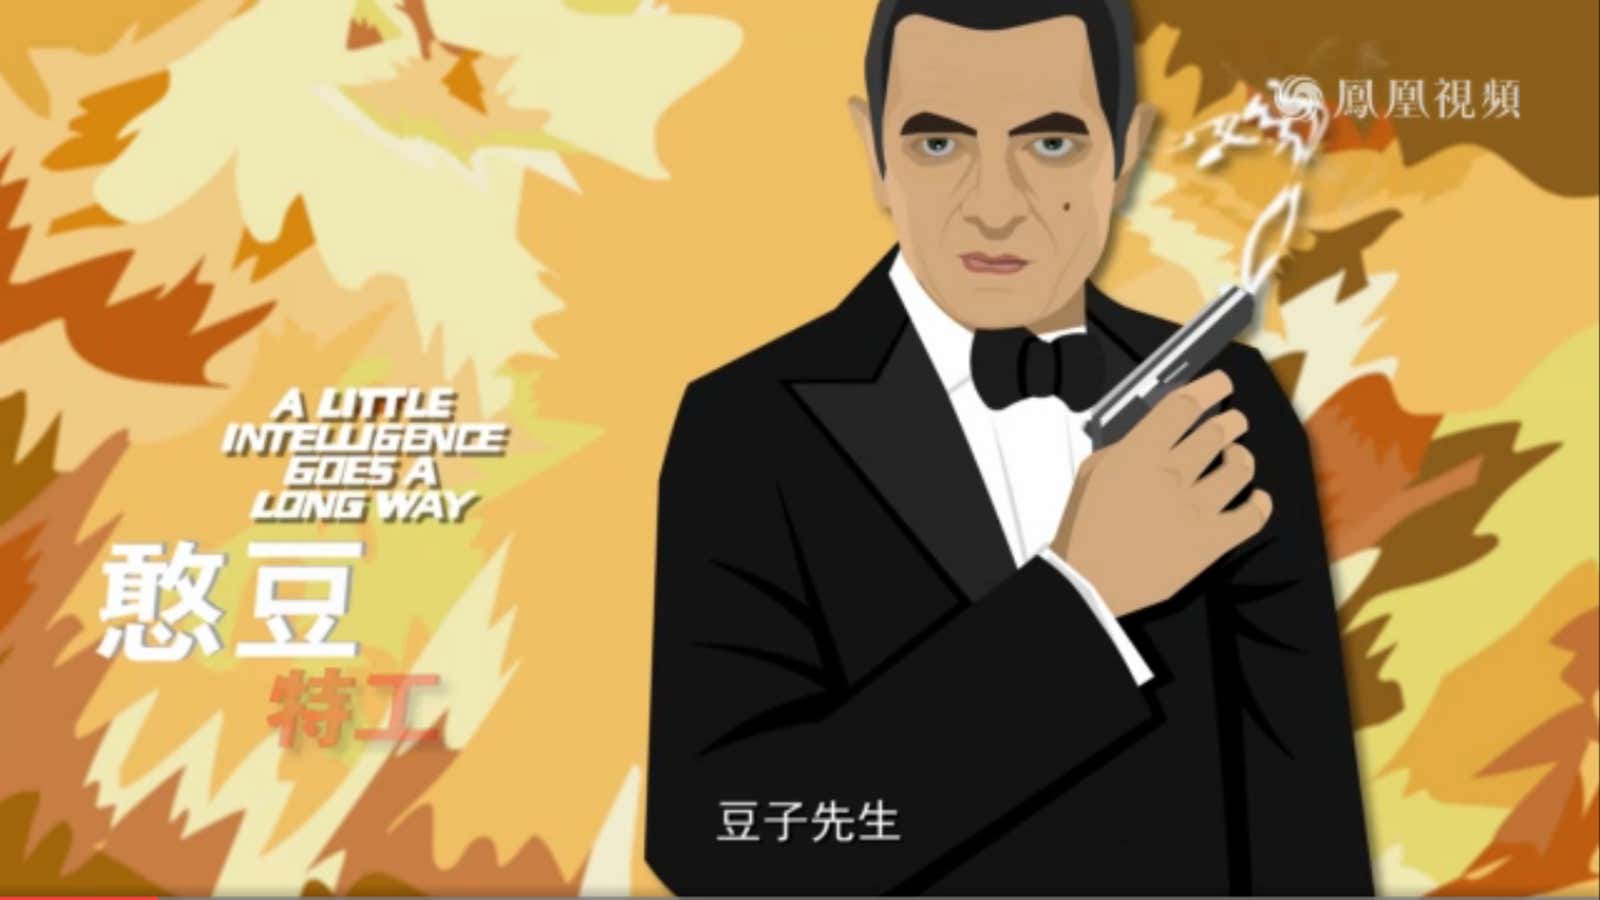 Mr. Bean—as featured by China’s ministry of state security.